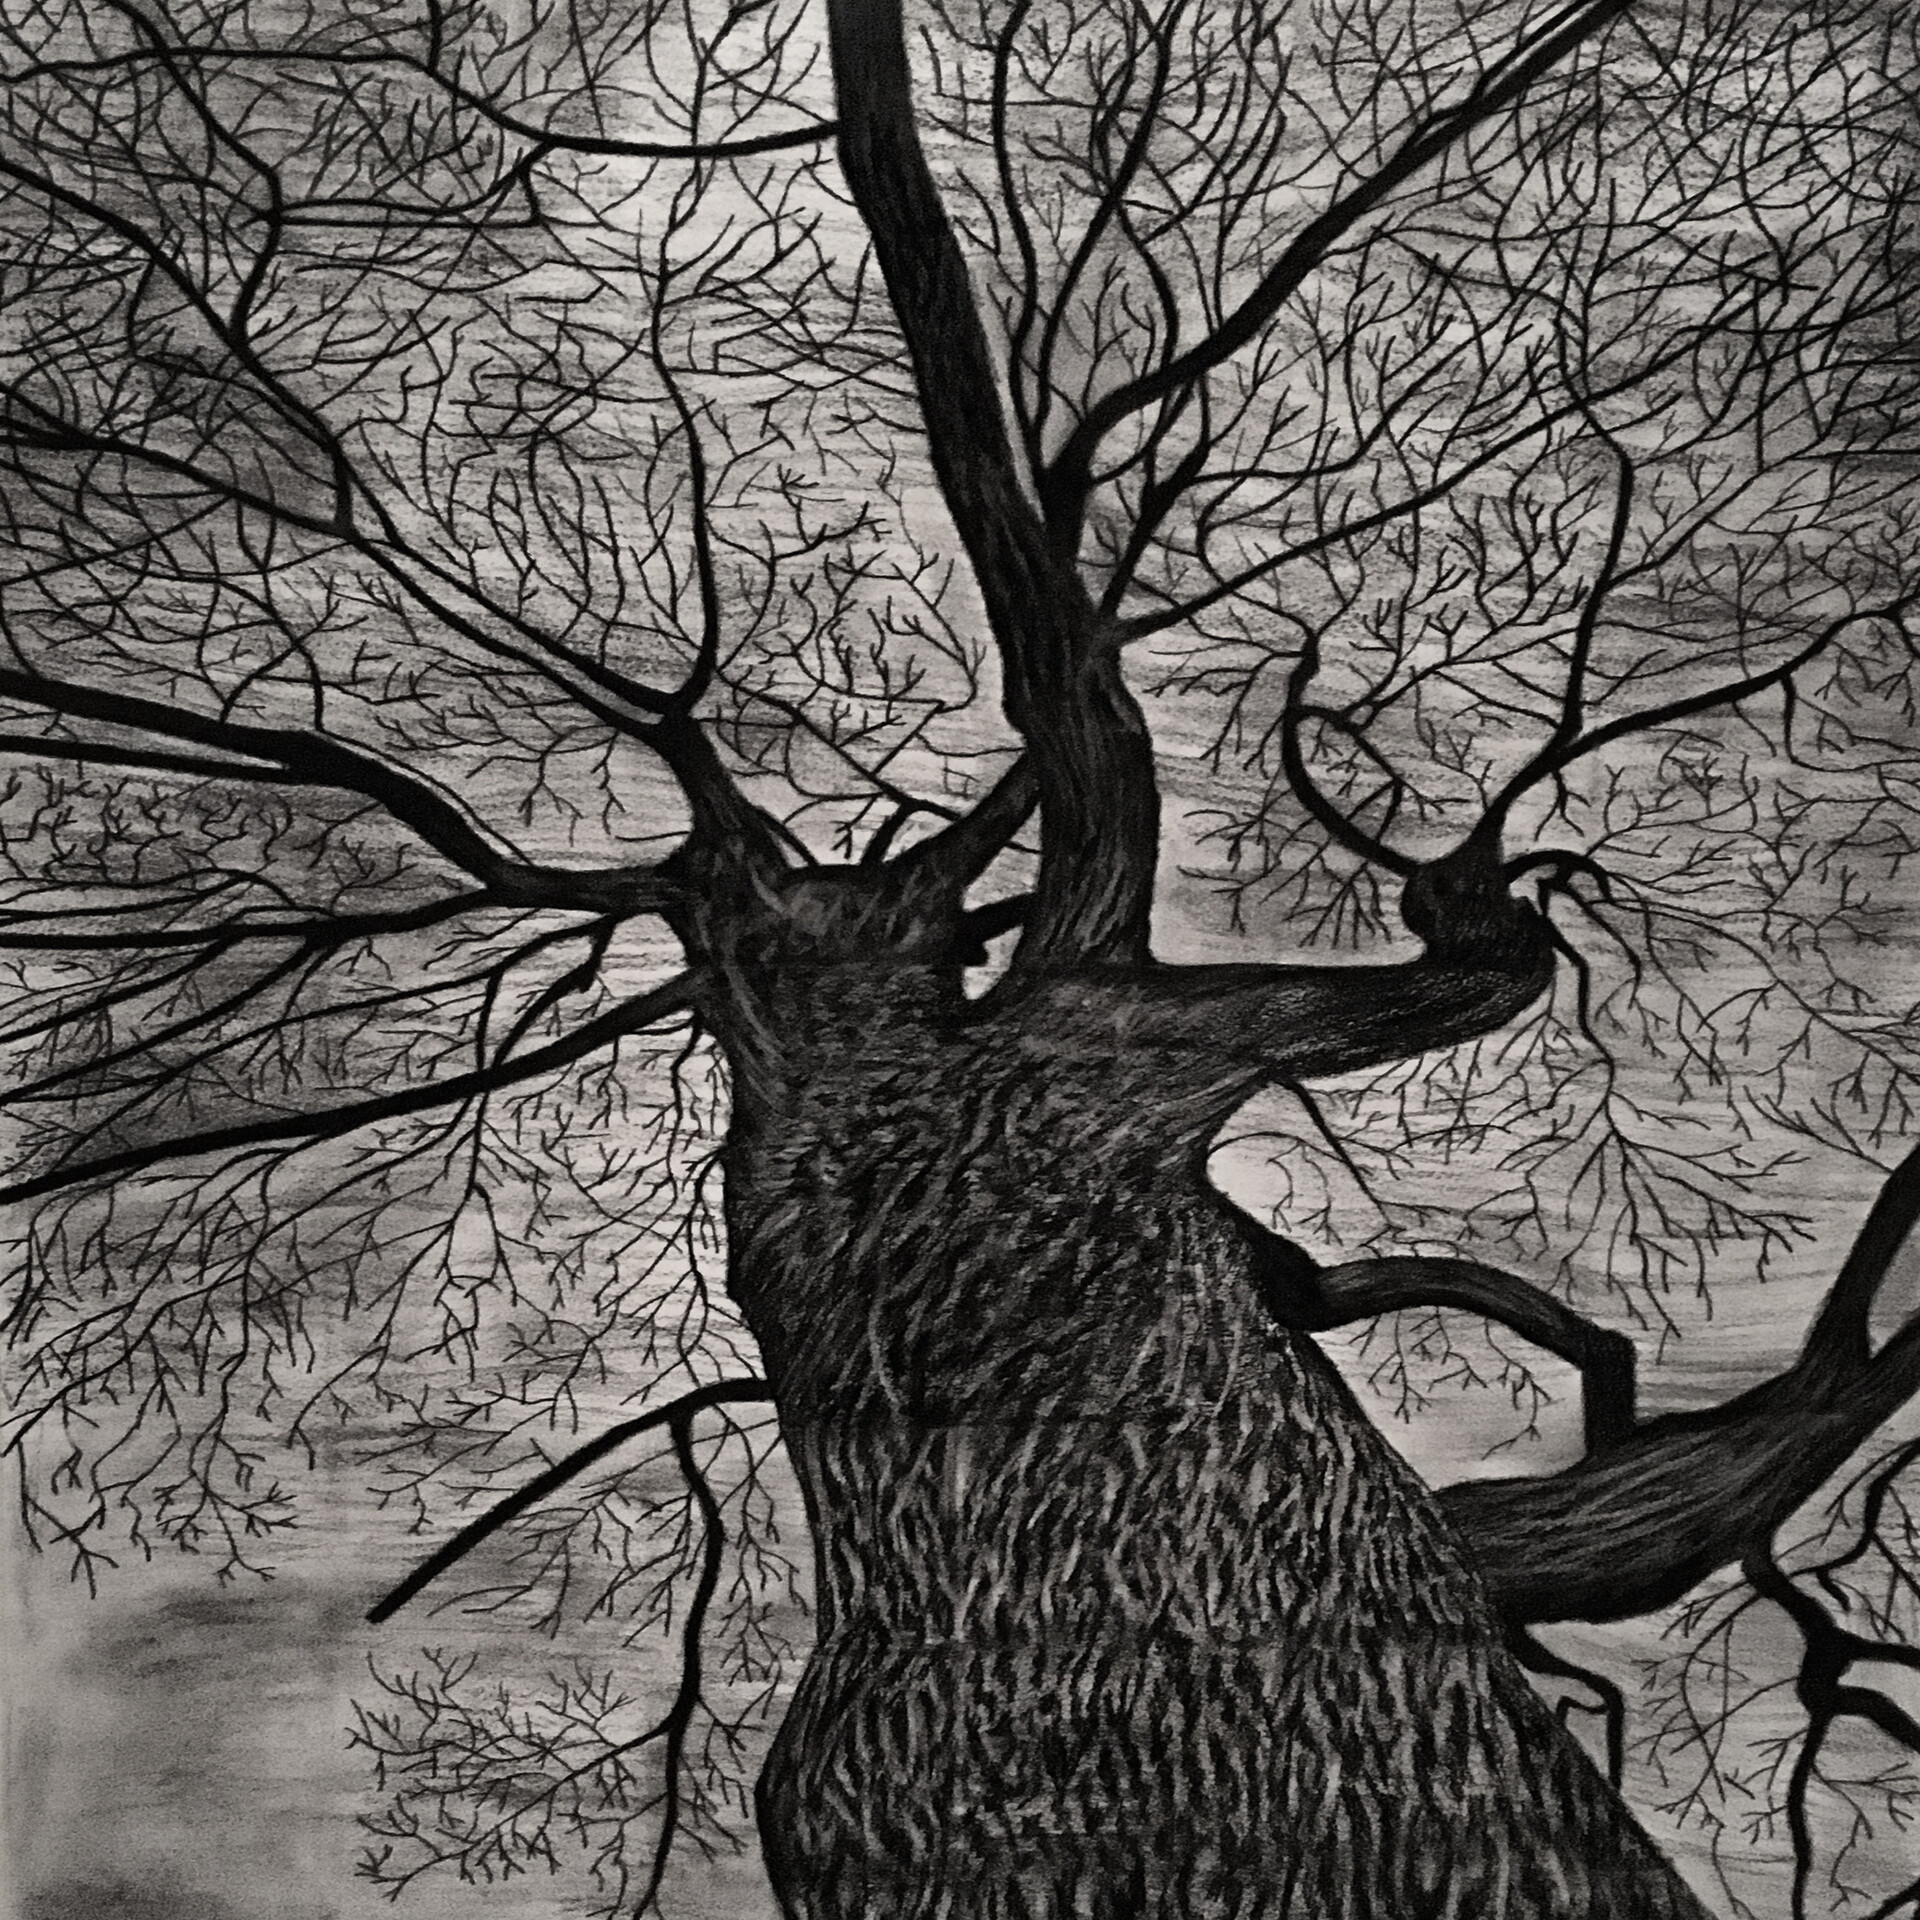 How to Draw a Tree with Vine Charcoal #easydrawing #beginerdrawing  #charcoaldrawing - YouTube